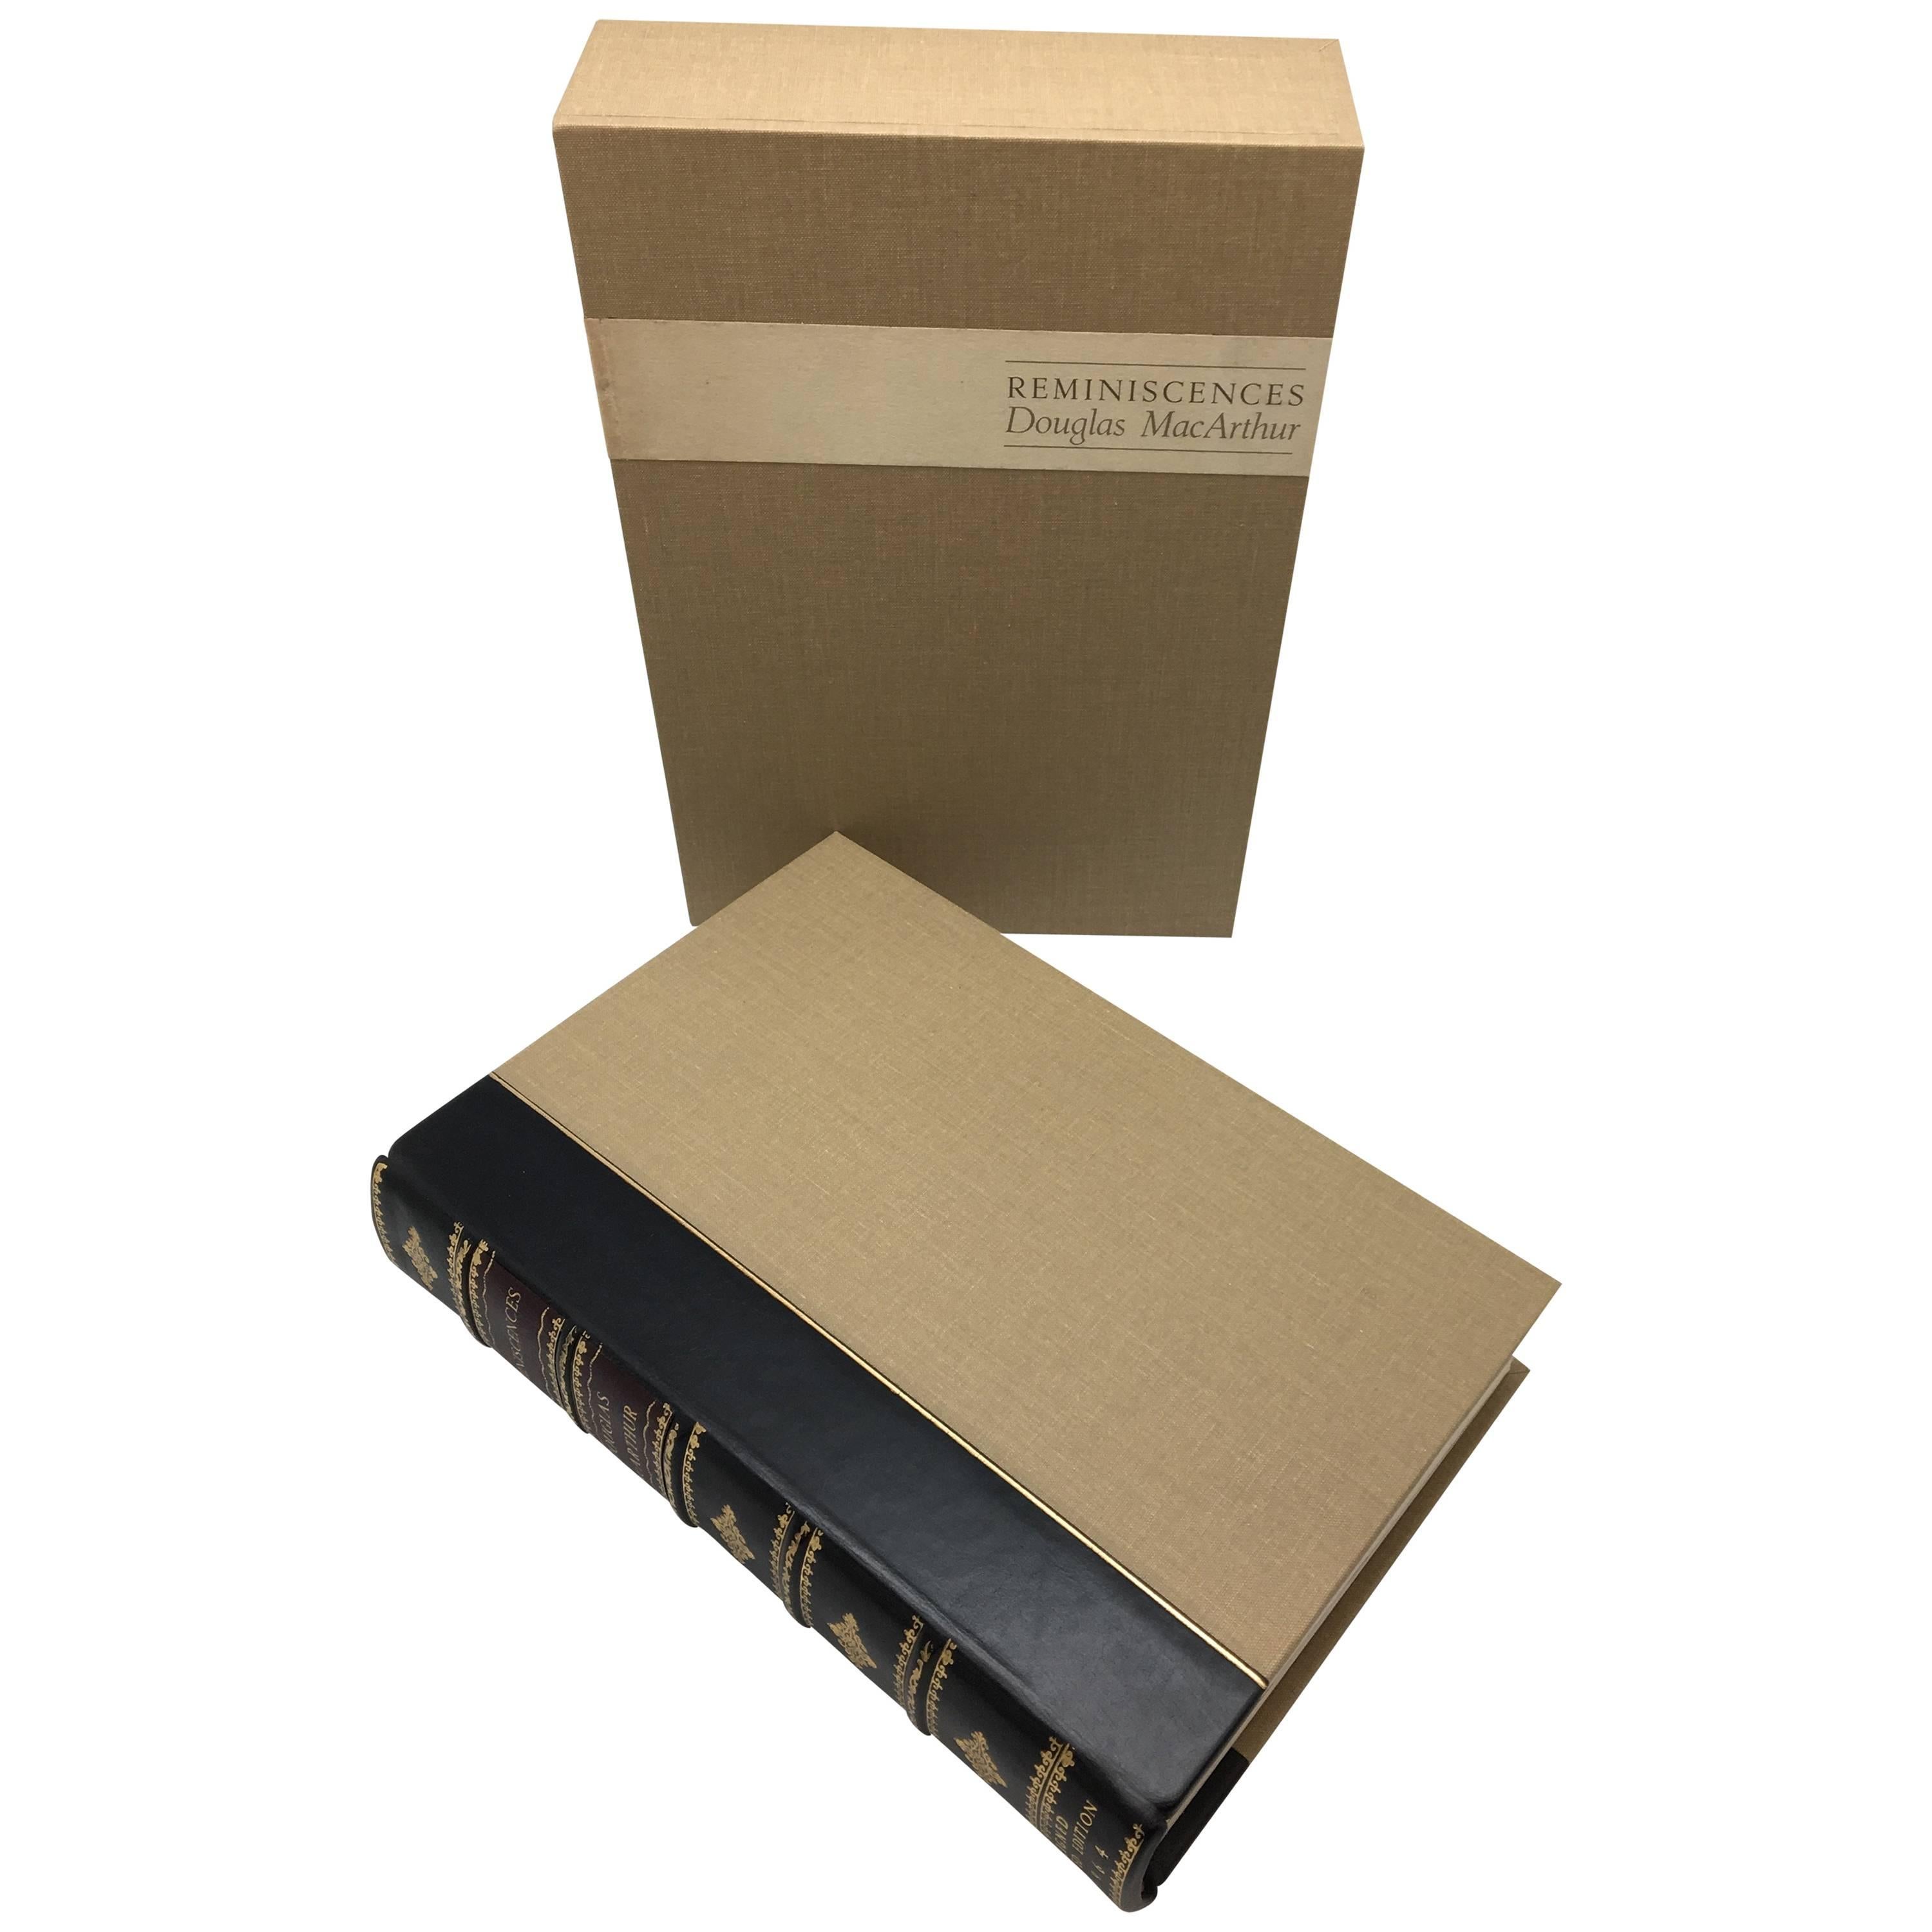 Reminiscences by Douglas Macarthur, Signed Limited Presentation Edition, 1964